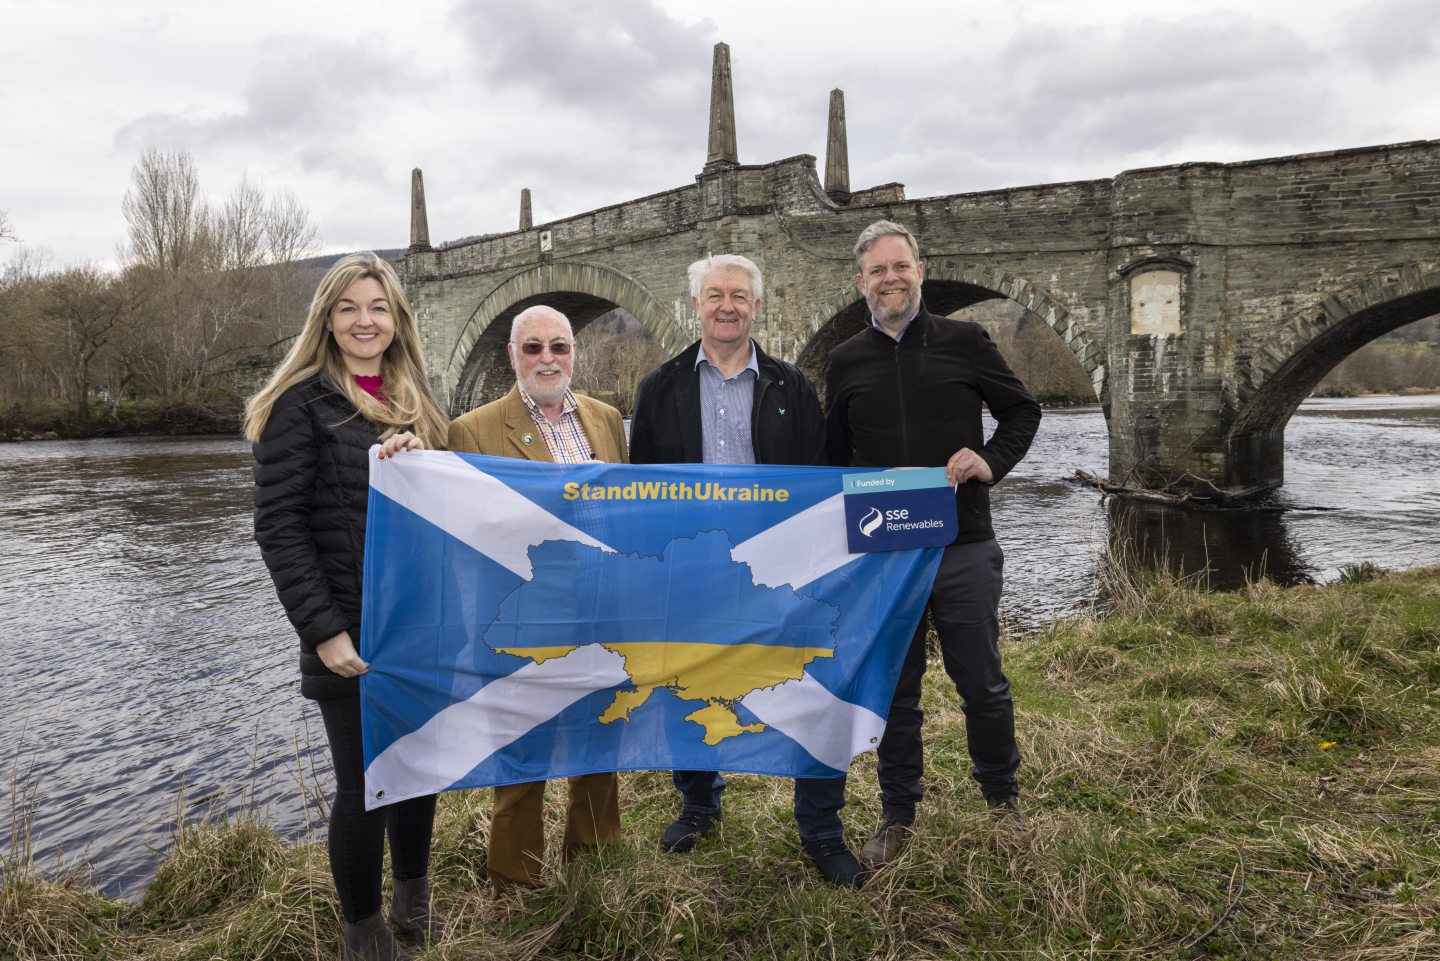 Highland Perthshire Welcomes Ukraine group